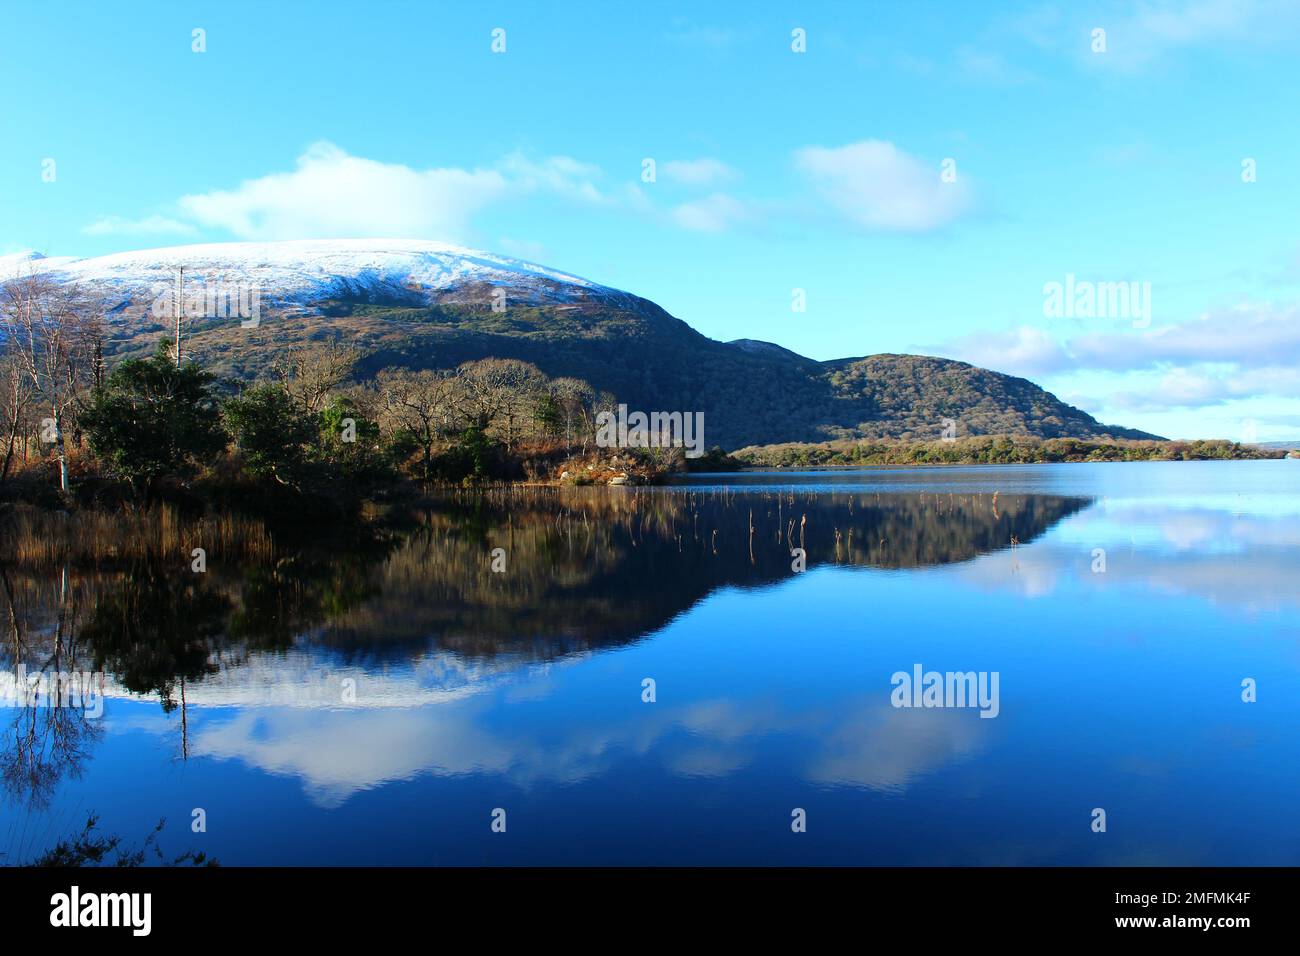 Snow topped Purple Mountain and Tomies Mountain reflected in Muckross Lake in winter on sunny afternoon - Killarney National Park, Co. Kerry, Ireland. Stock Photo